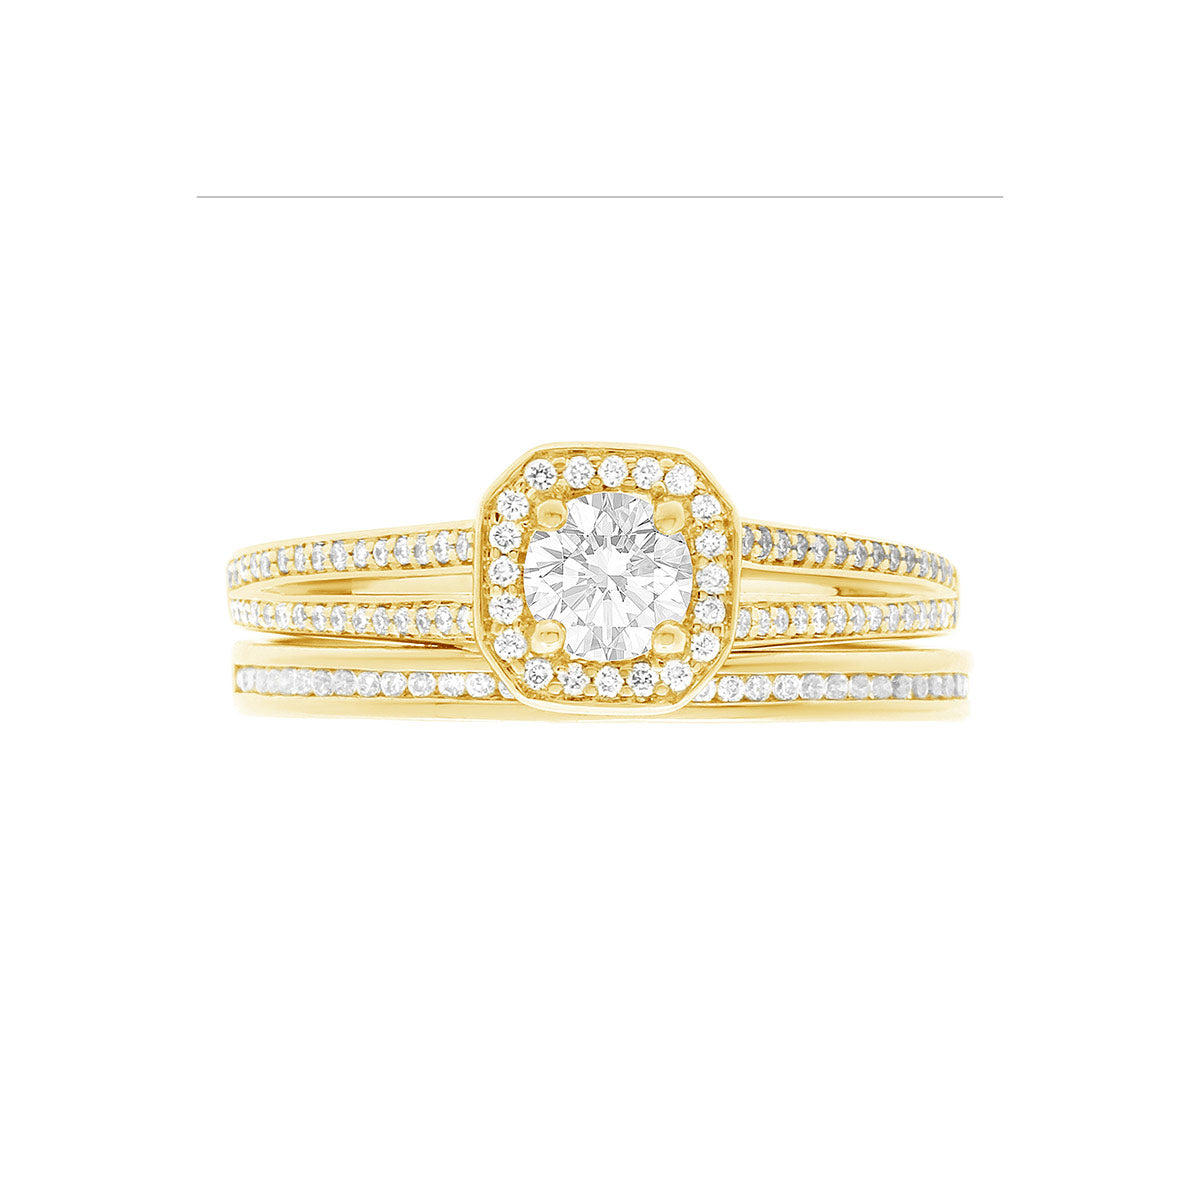 Pavé Halo Diamond Ring in yellow gold with a matching yellow gold and diamond wedding band